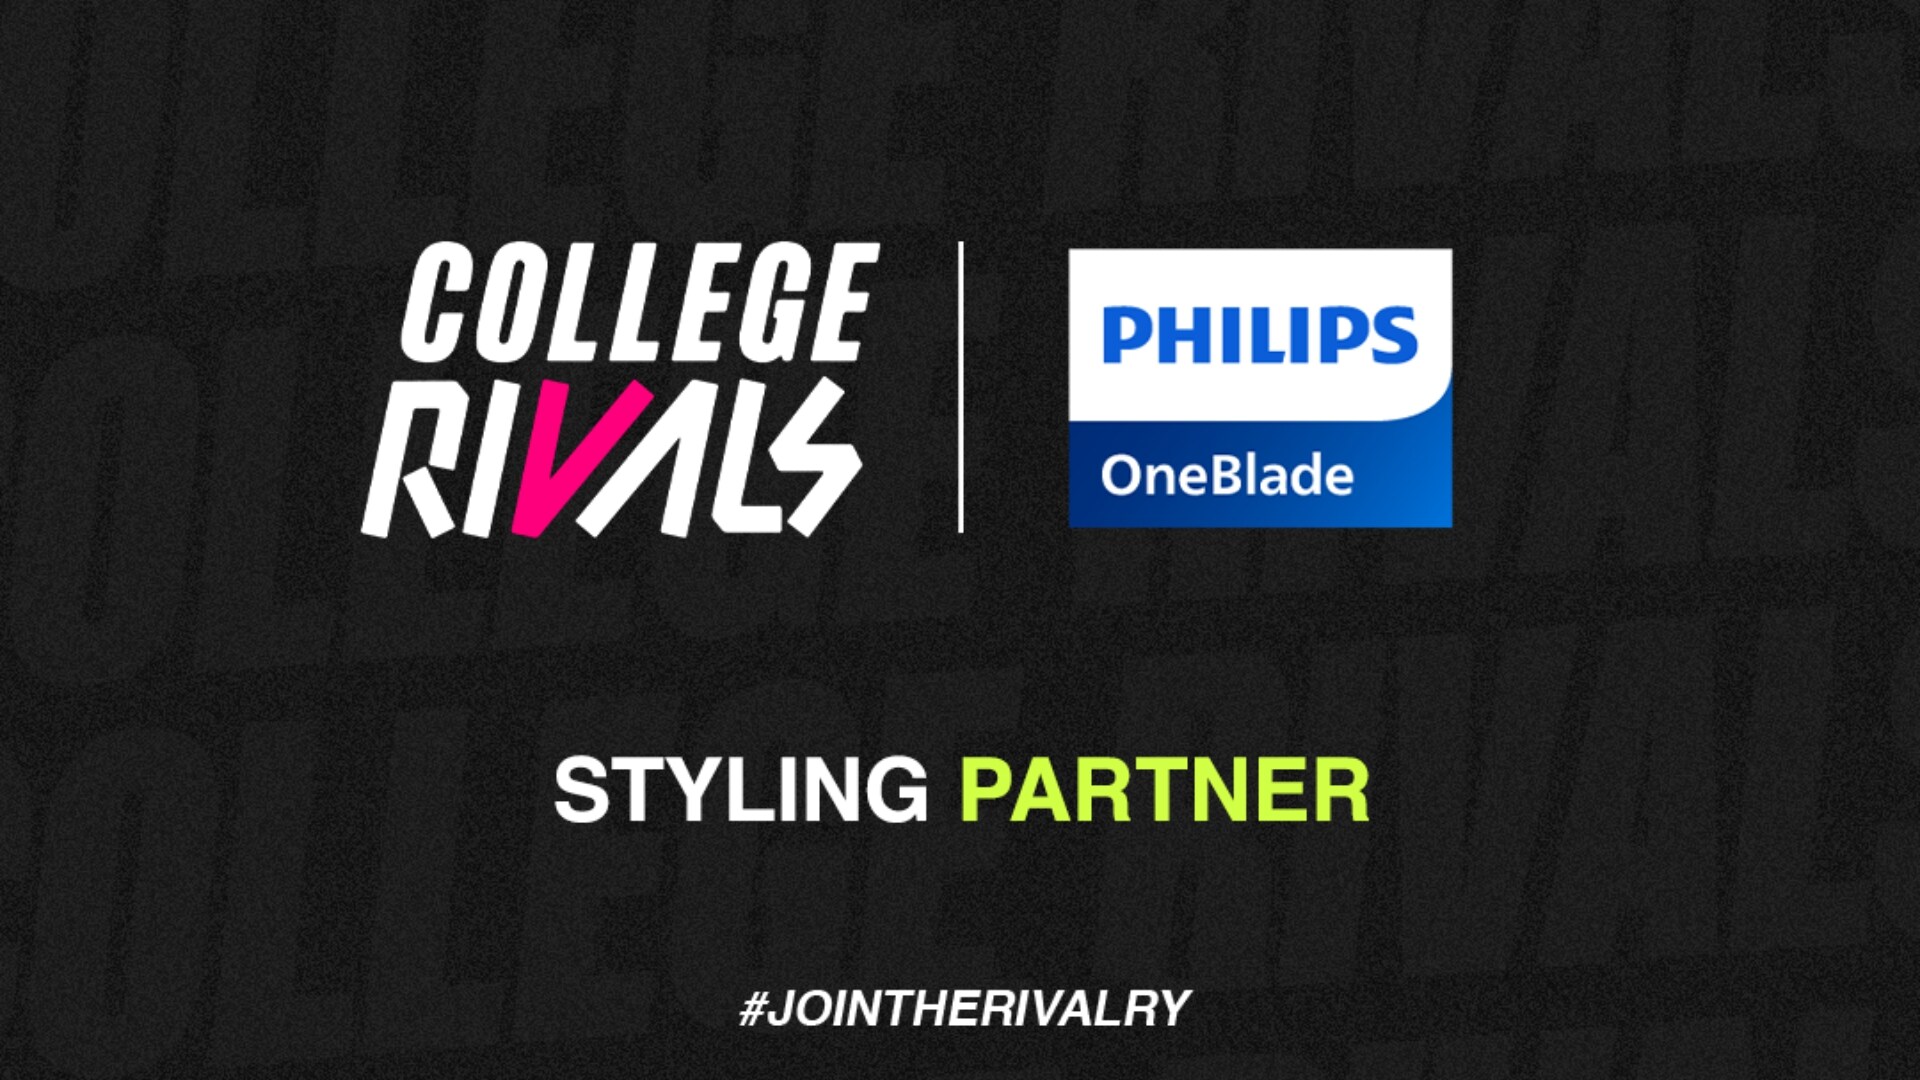 Philips OneBlade Partners with College Rivals for an Epic Gaming Journey Enabling Gen Z to ‘Move Fearlessly’